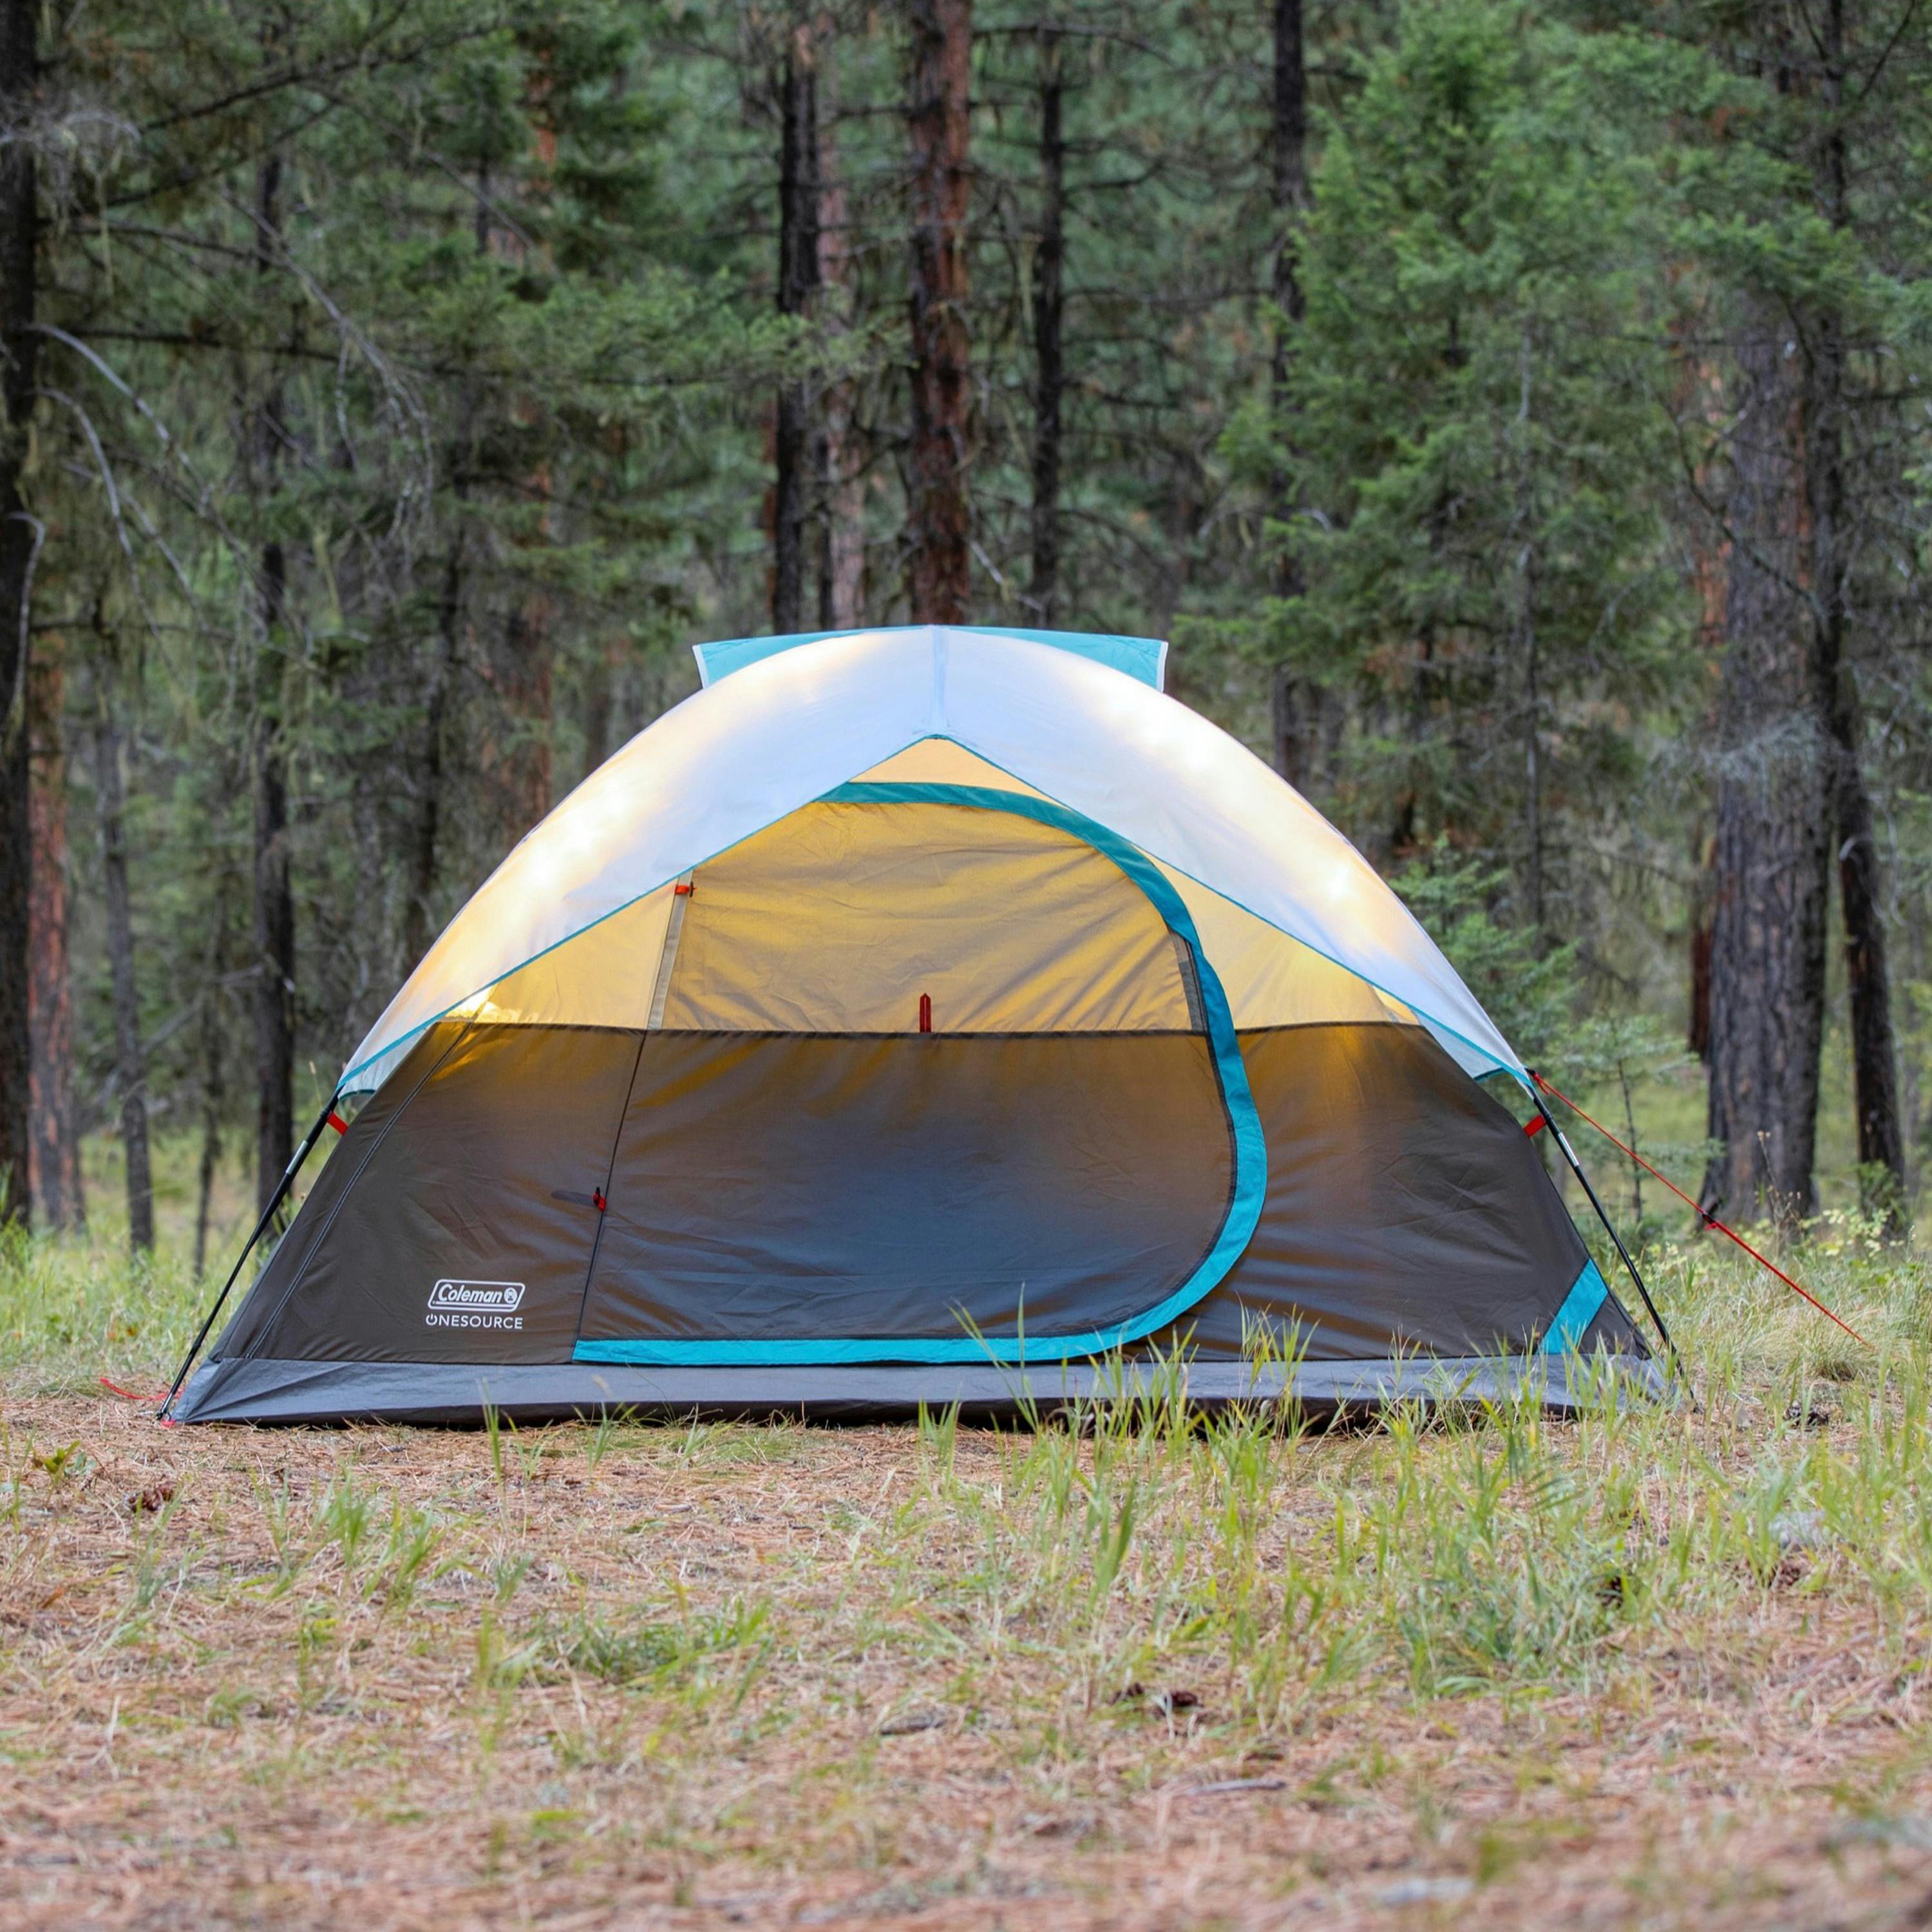 Coleman OneSource Camping Dome Tent with Airflow System and LED Lighting  6 Person  Black/White/Carribbean Blue